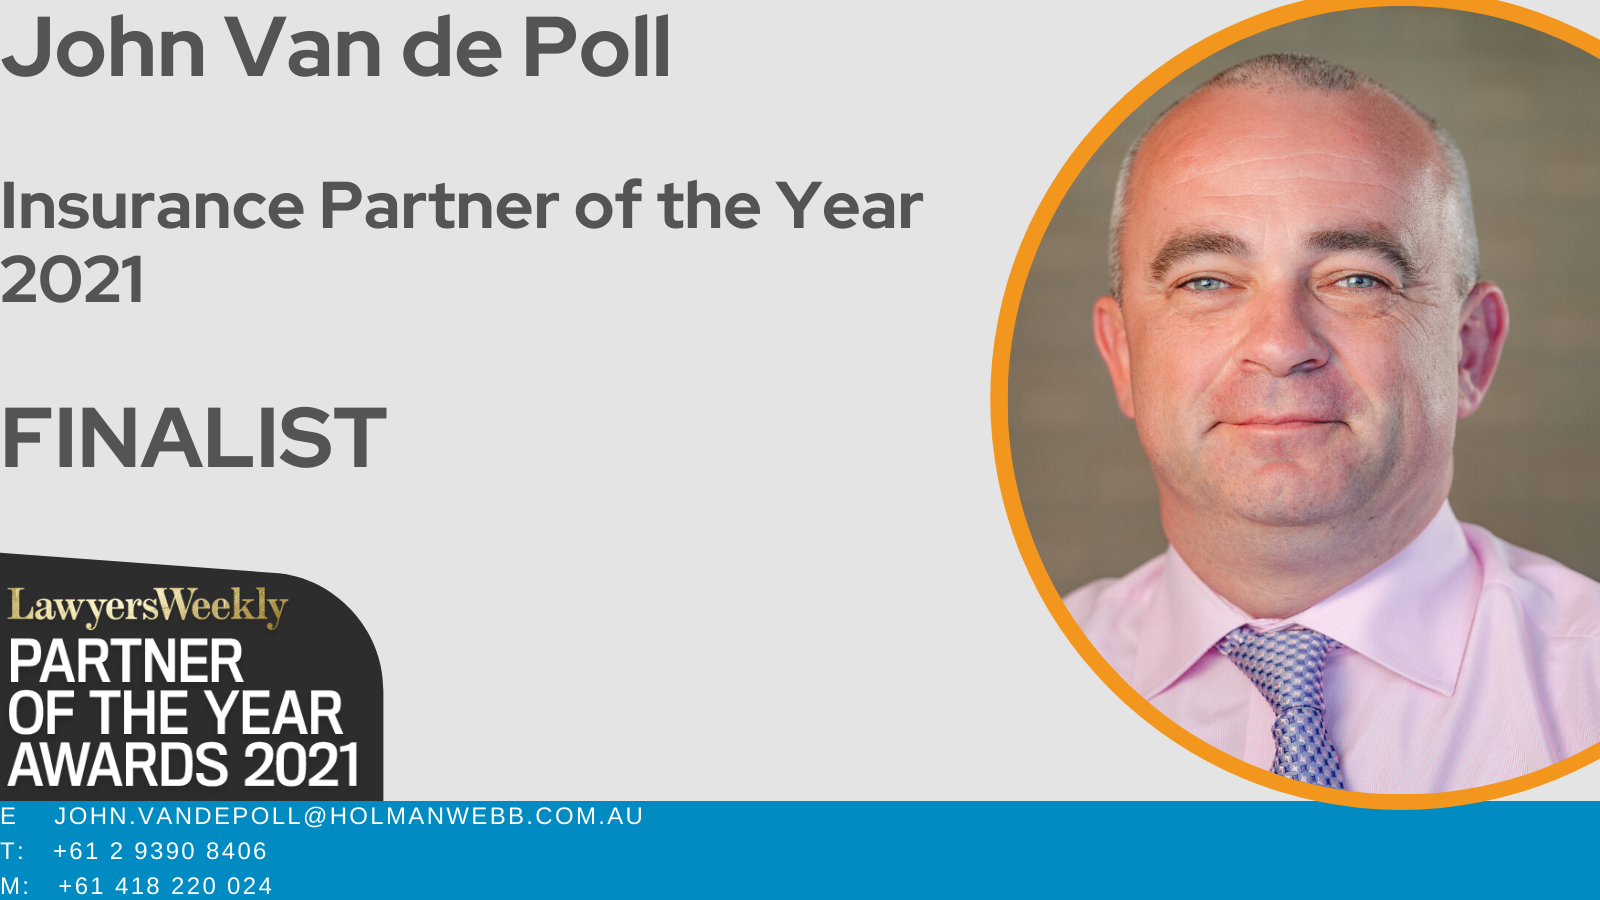 John Van de Poll Listed as Finalist in the Lawyers Weekly Partner of the Year Awards 2021